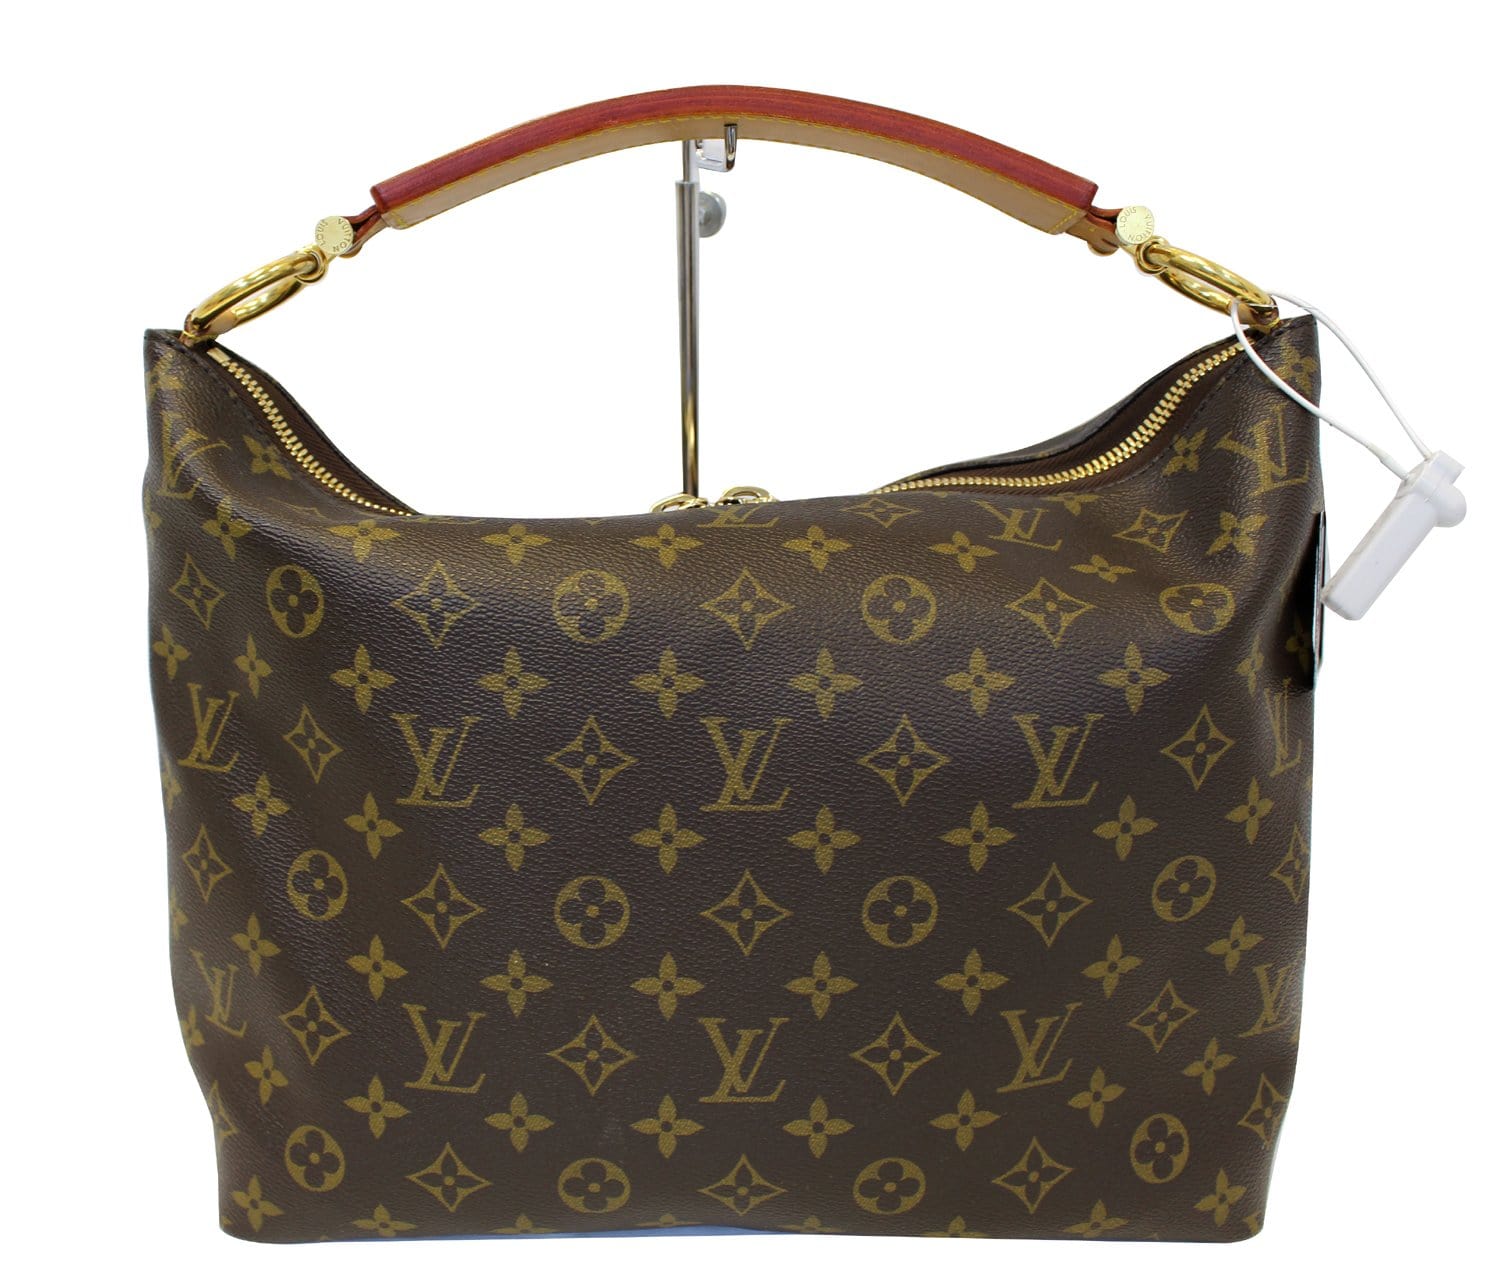 Louis Vuitton Sully PM in Monogram - SOLD  Lv handbags, Louis vuitton,  Cheap louis vuitton handbags